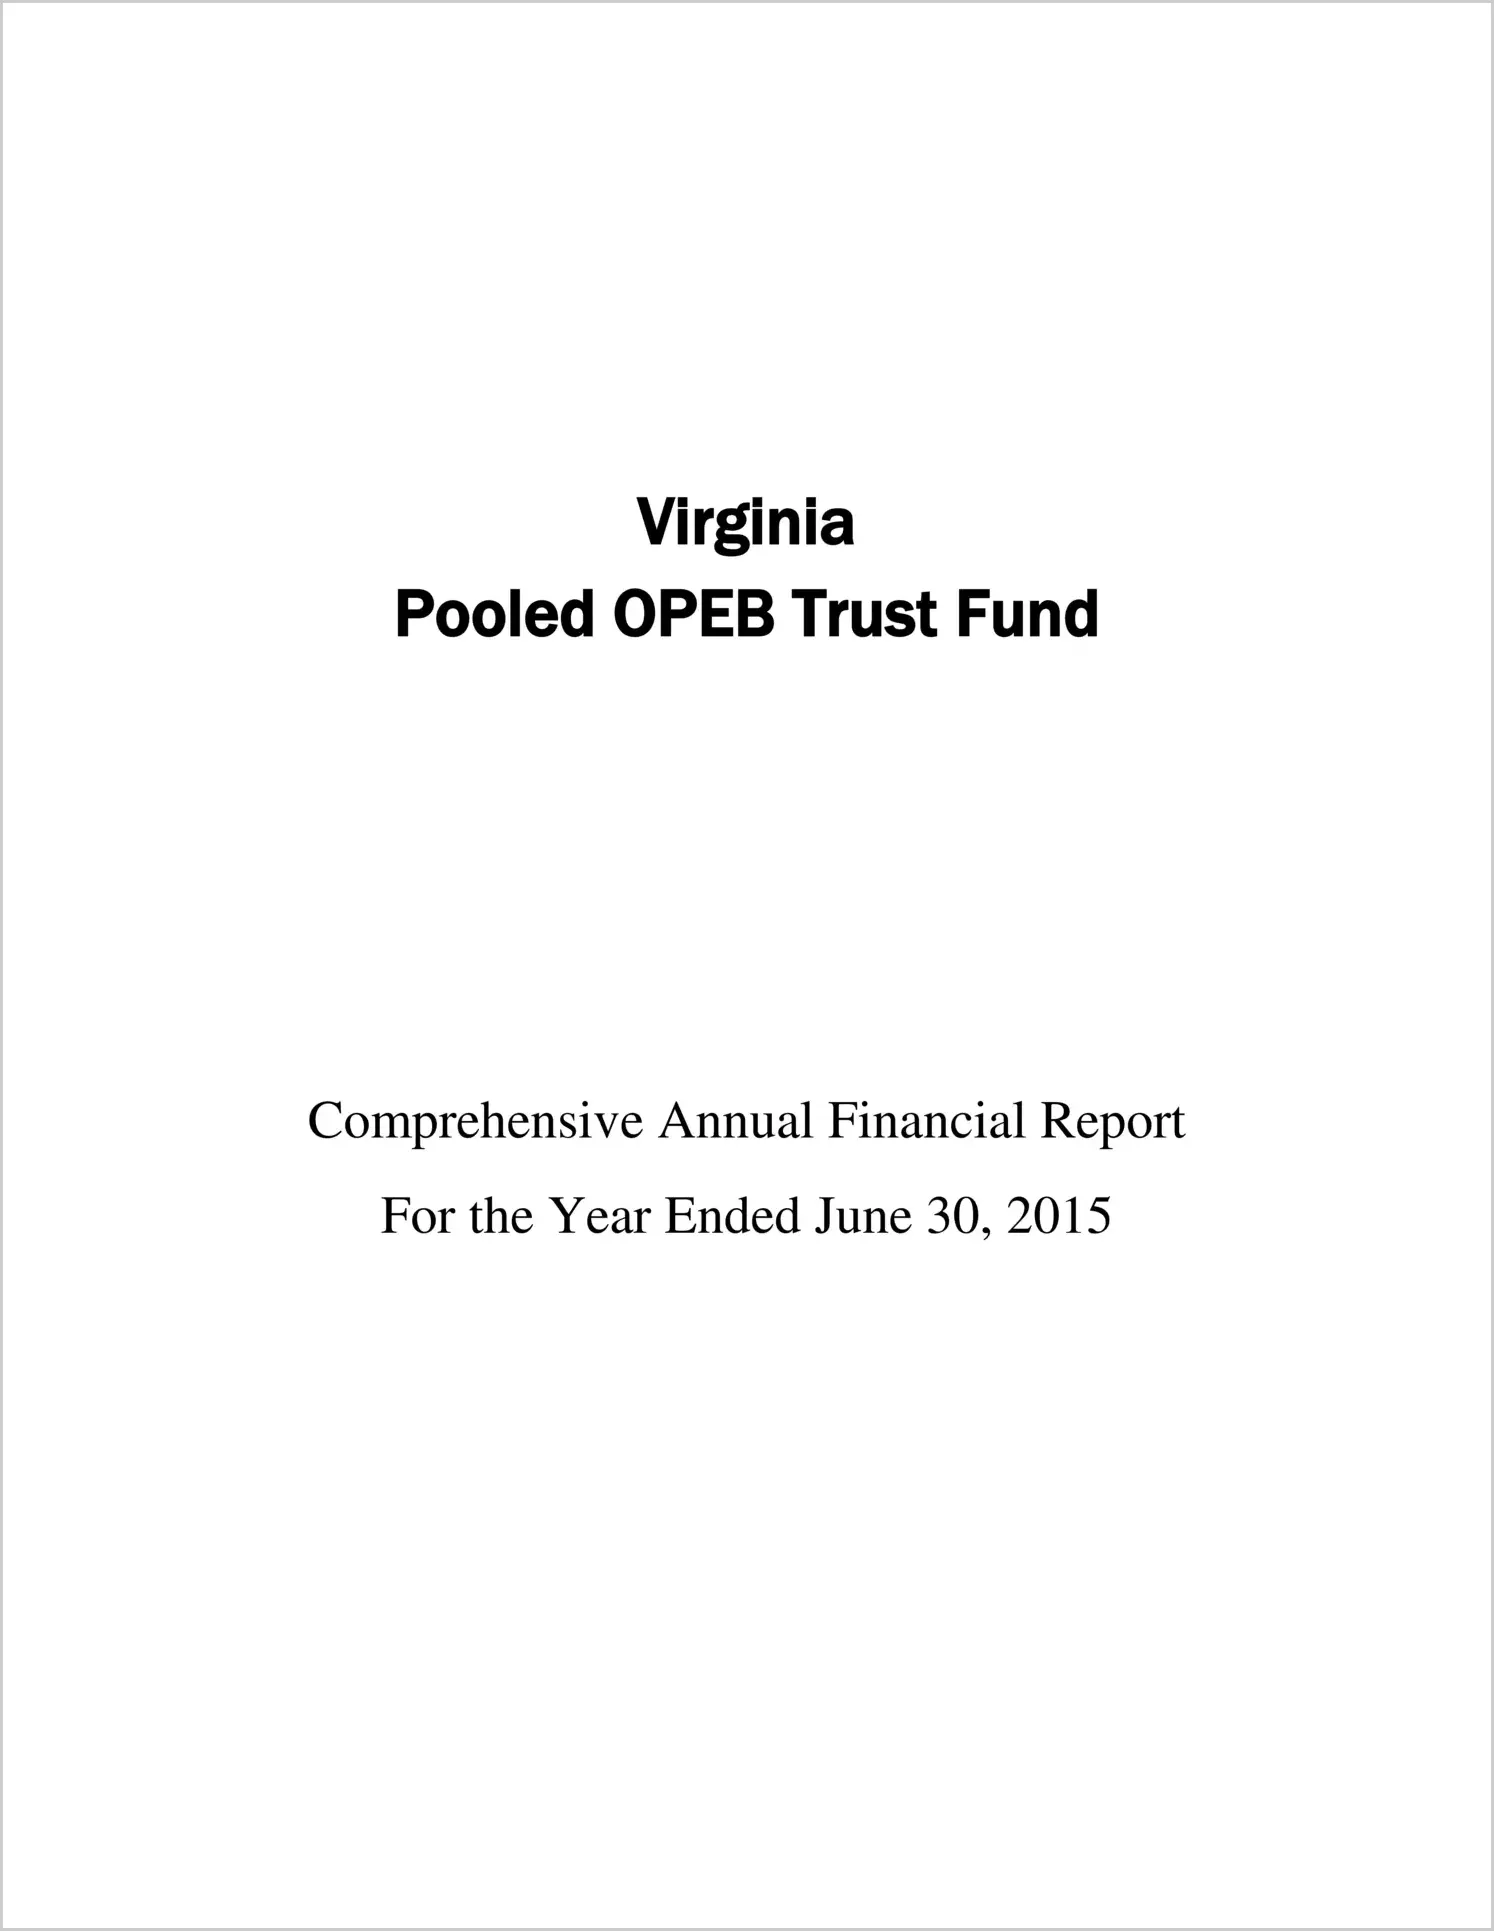 2015 ABC/Other Annual Financial Report  for Virginia Pooled OPEB Trust Fund